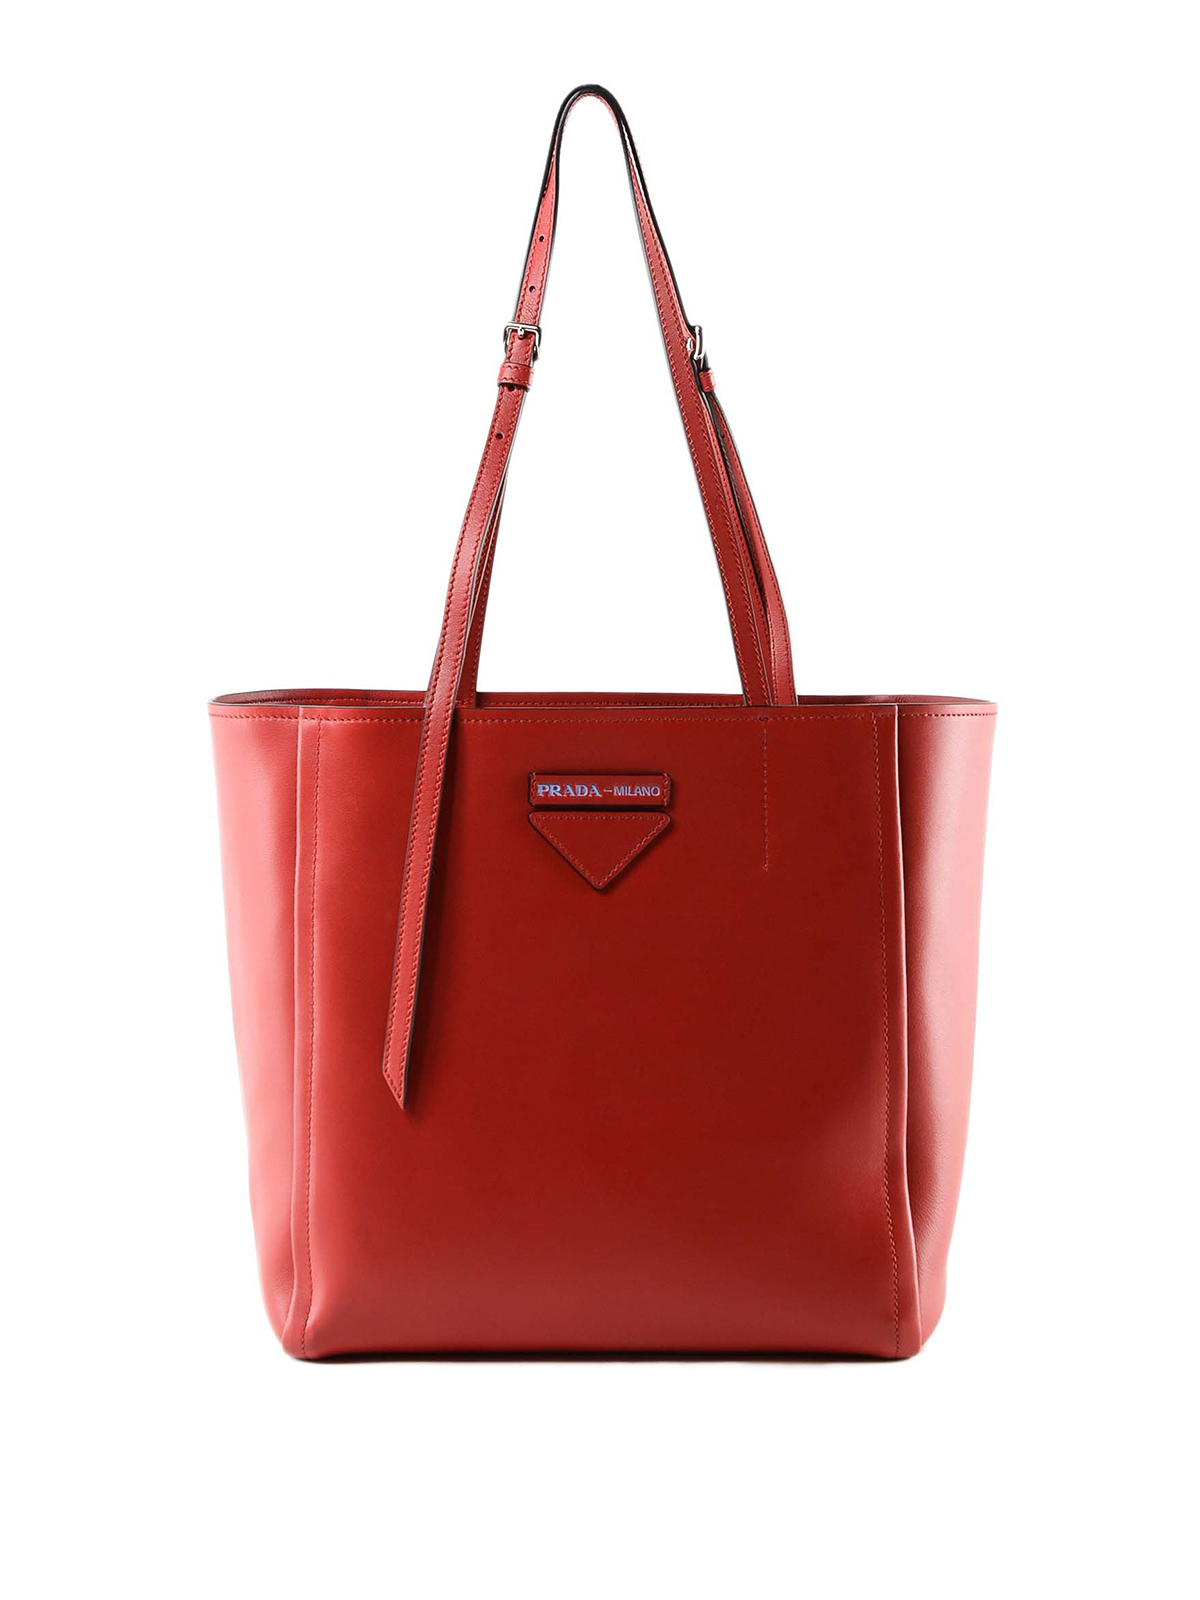 Prada - Concept small red leather tote bag - totes bags - 1BG2092B2JCF5